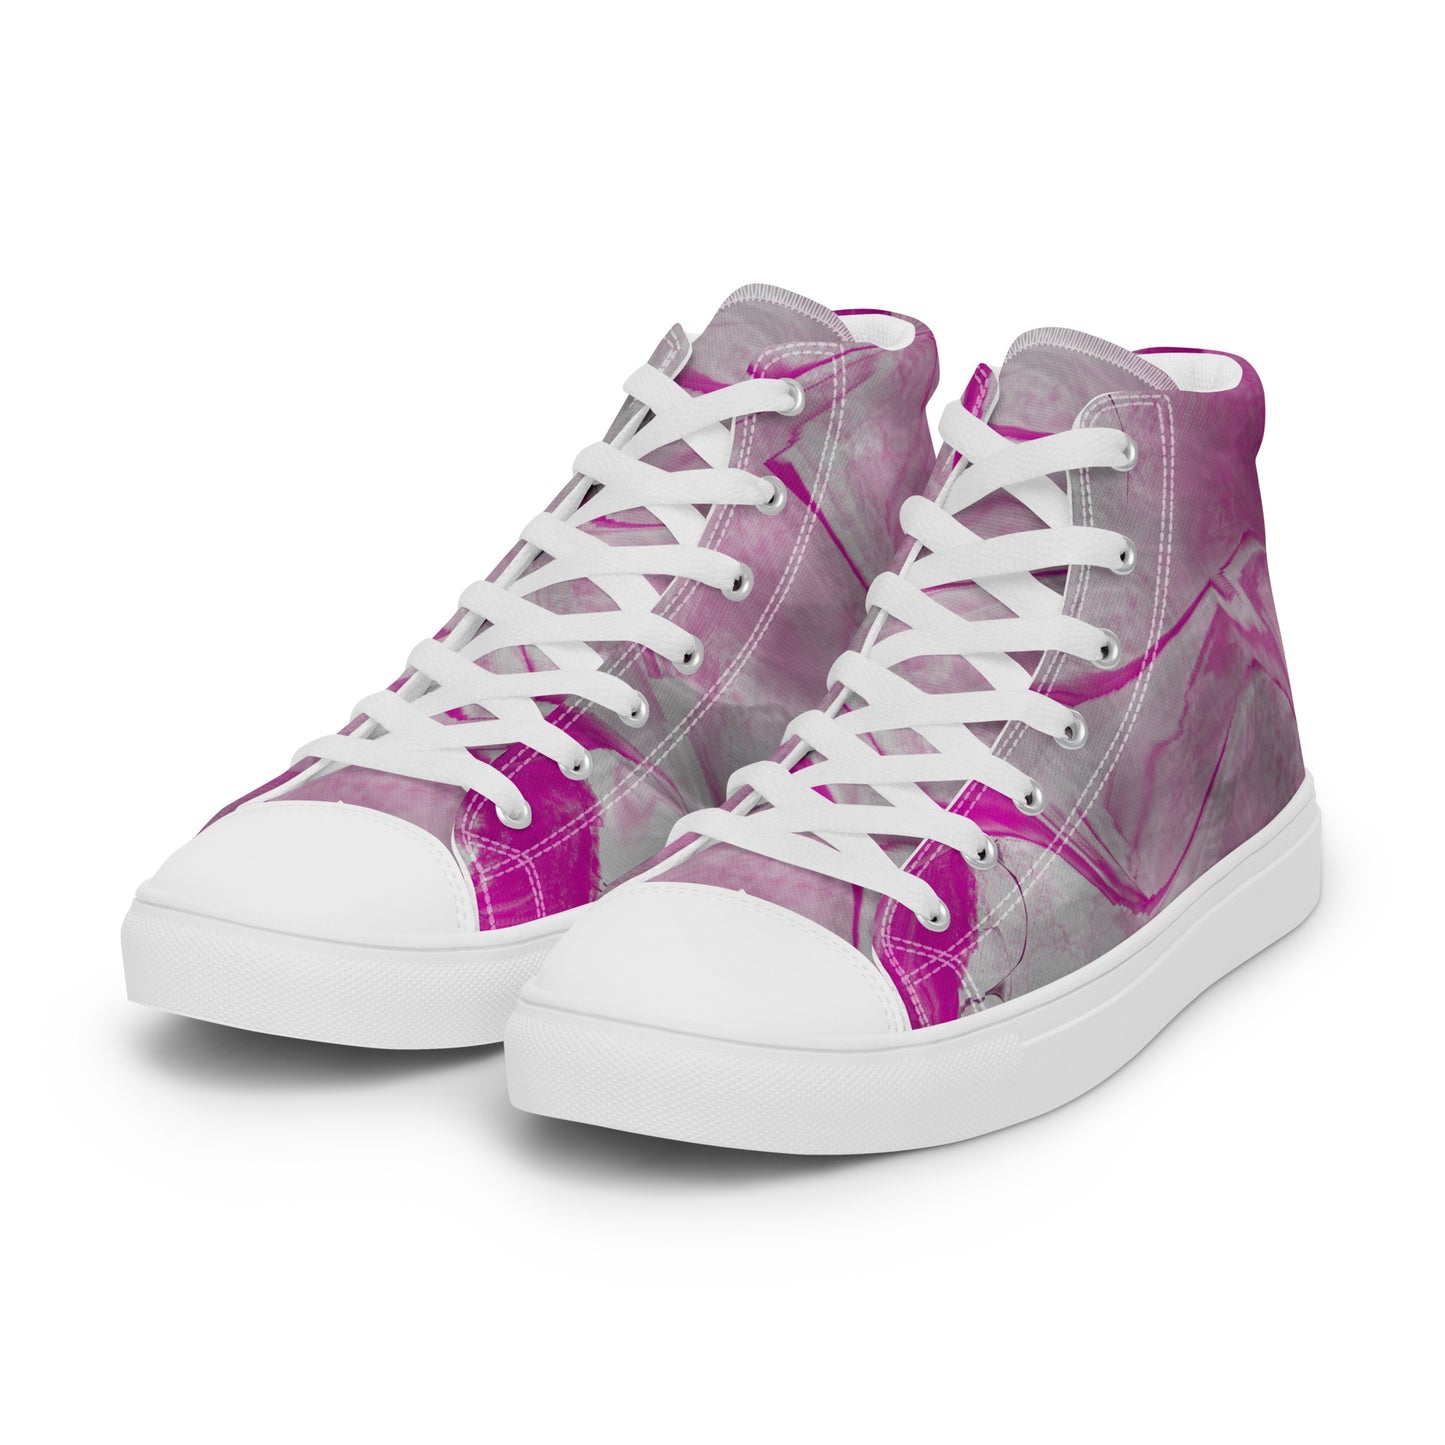 Muse high top canvas shoes